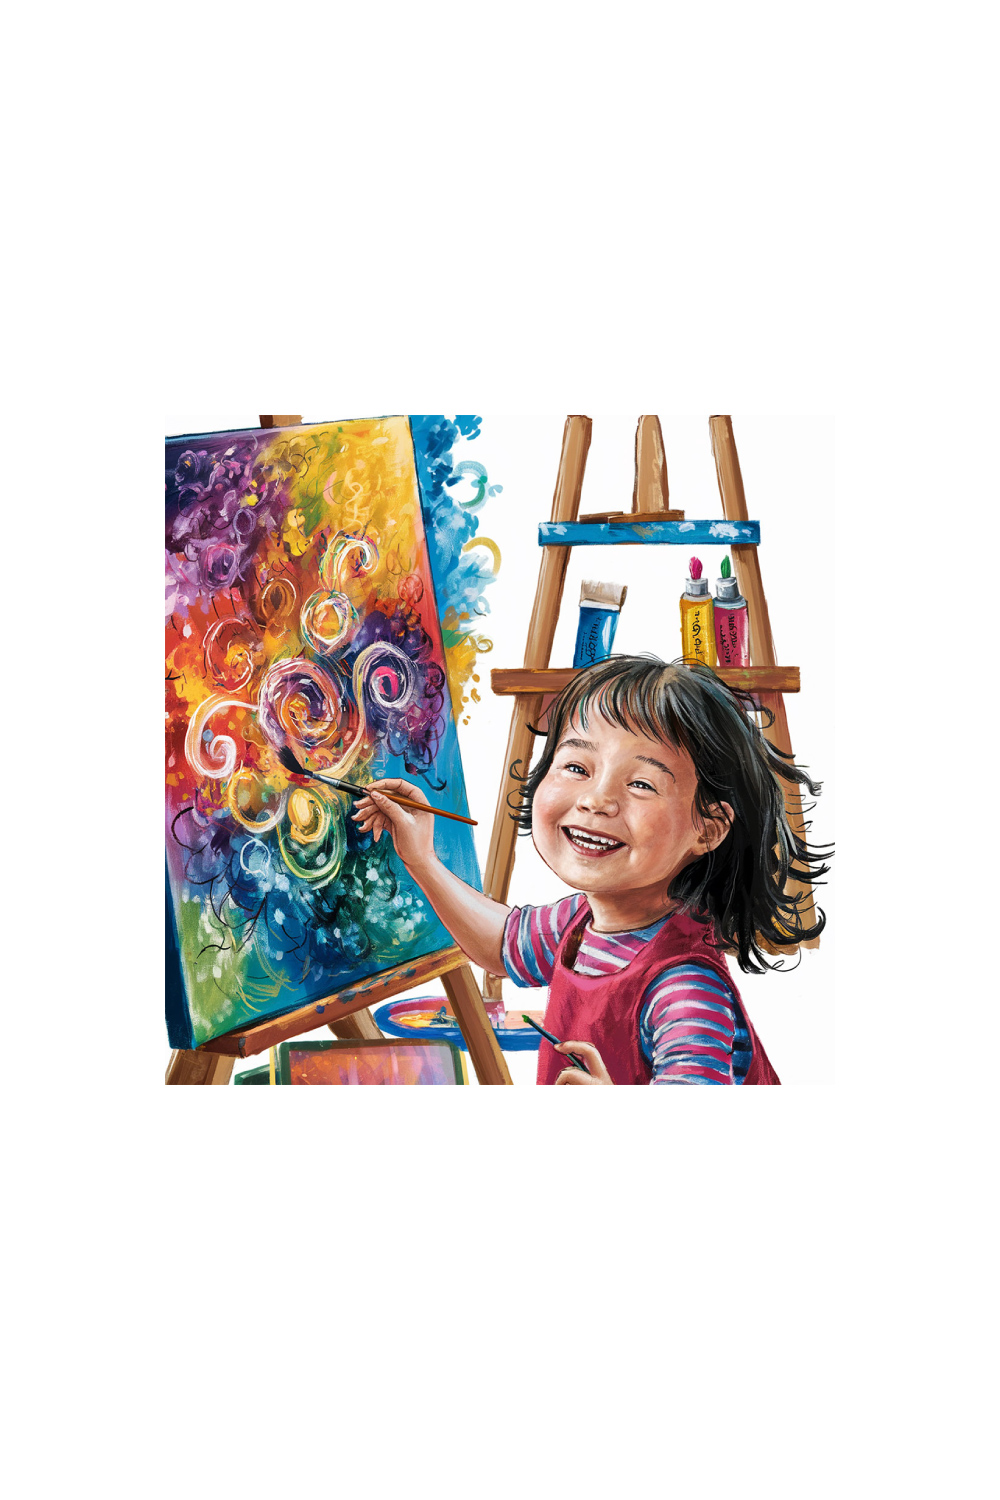 12 cute girl smiling painting colorful artwork Painting pinterest preview image.